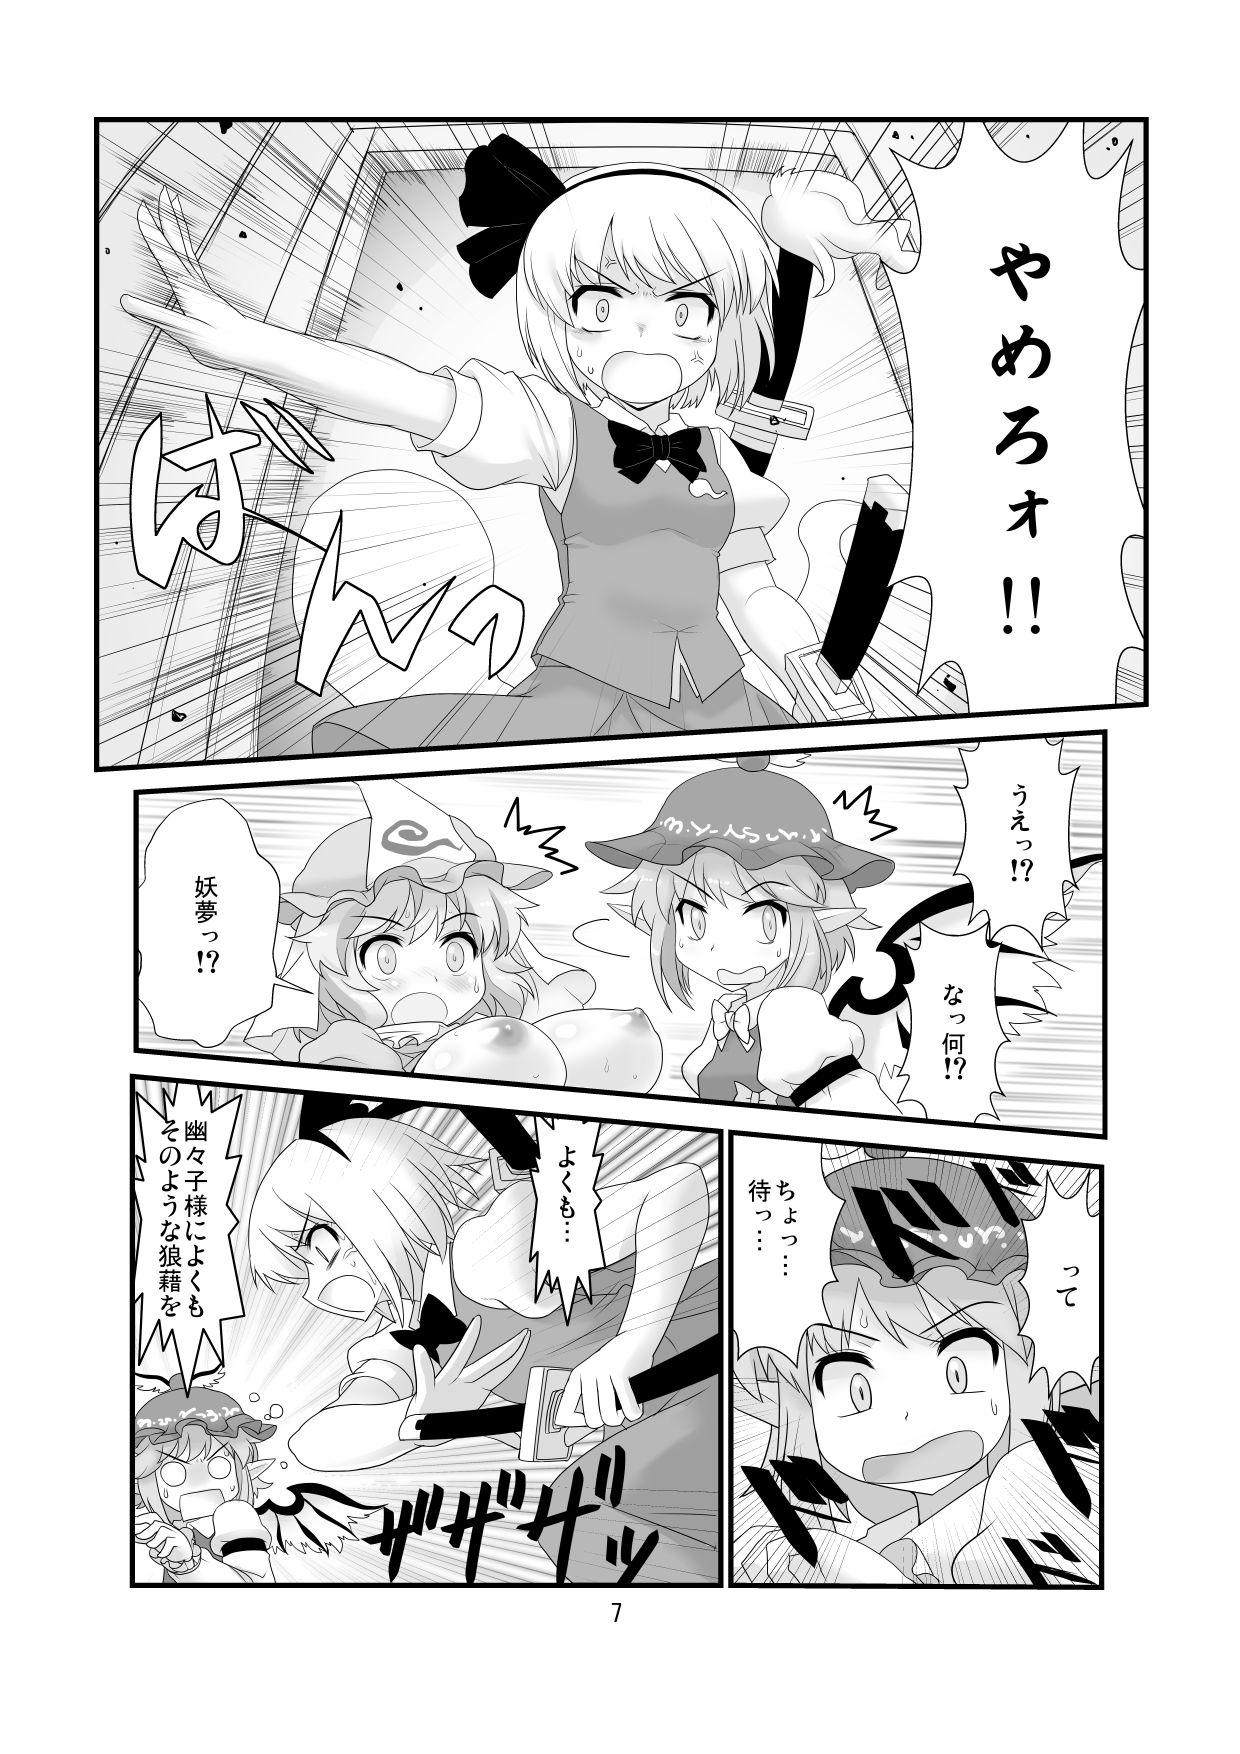 Trans Super Wriggle Cooking - Touhou project High Definition - Page 8